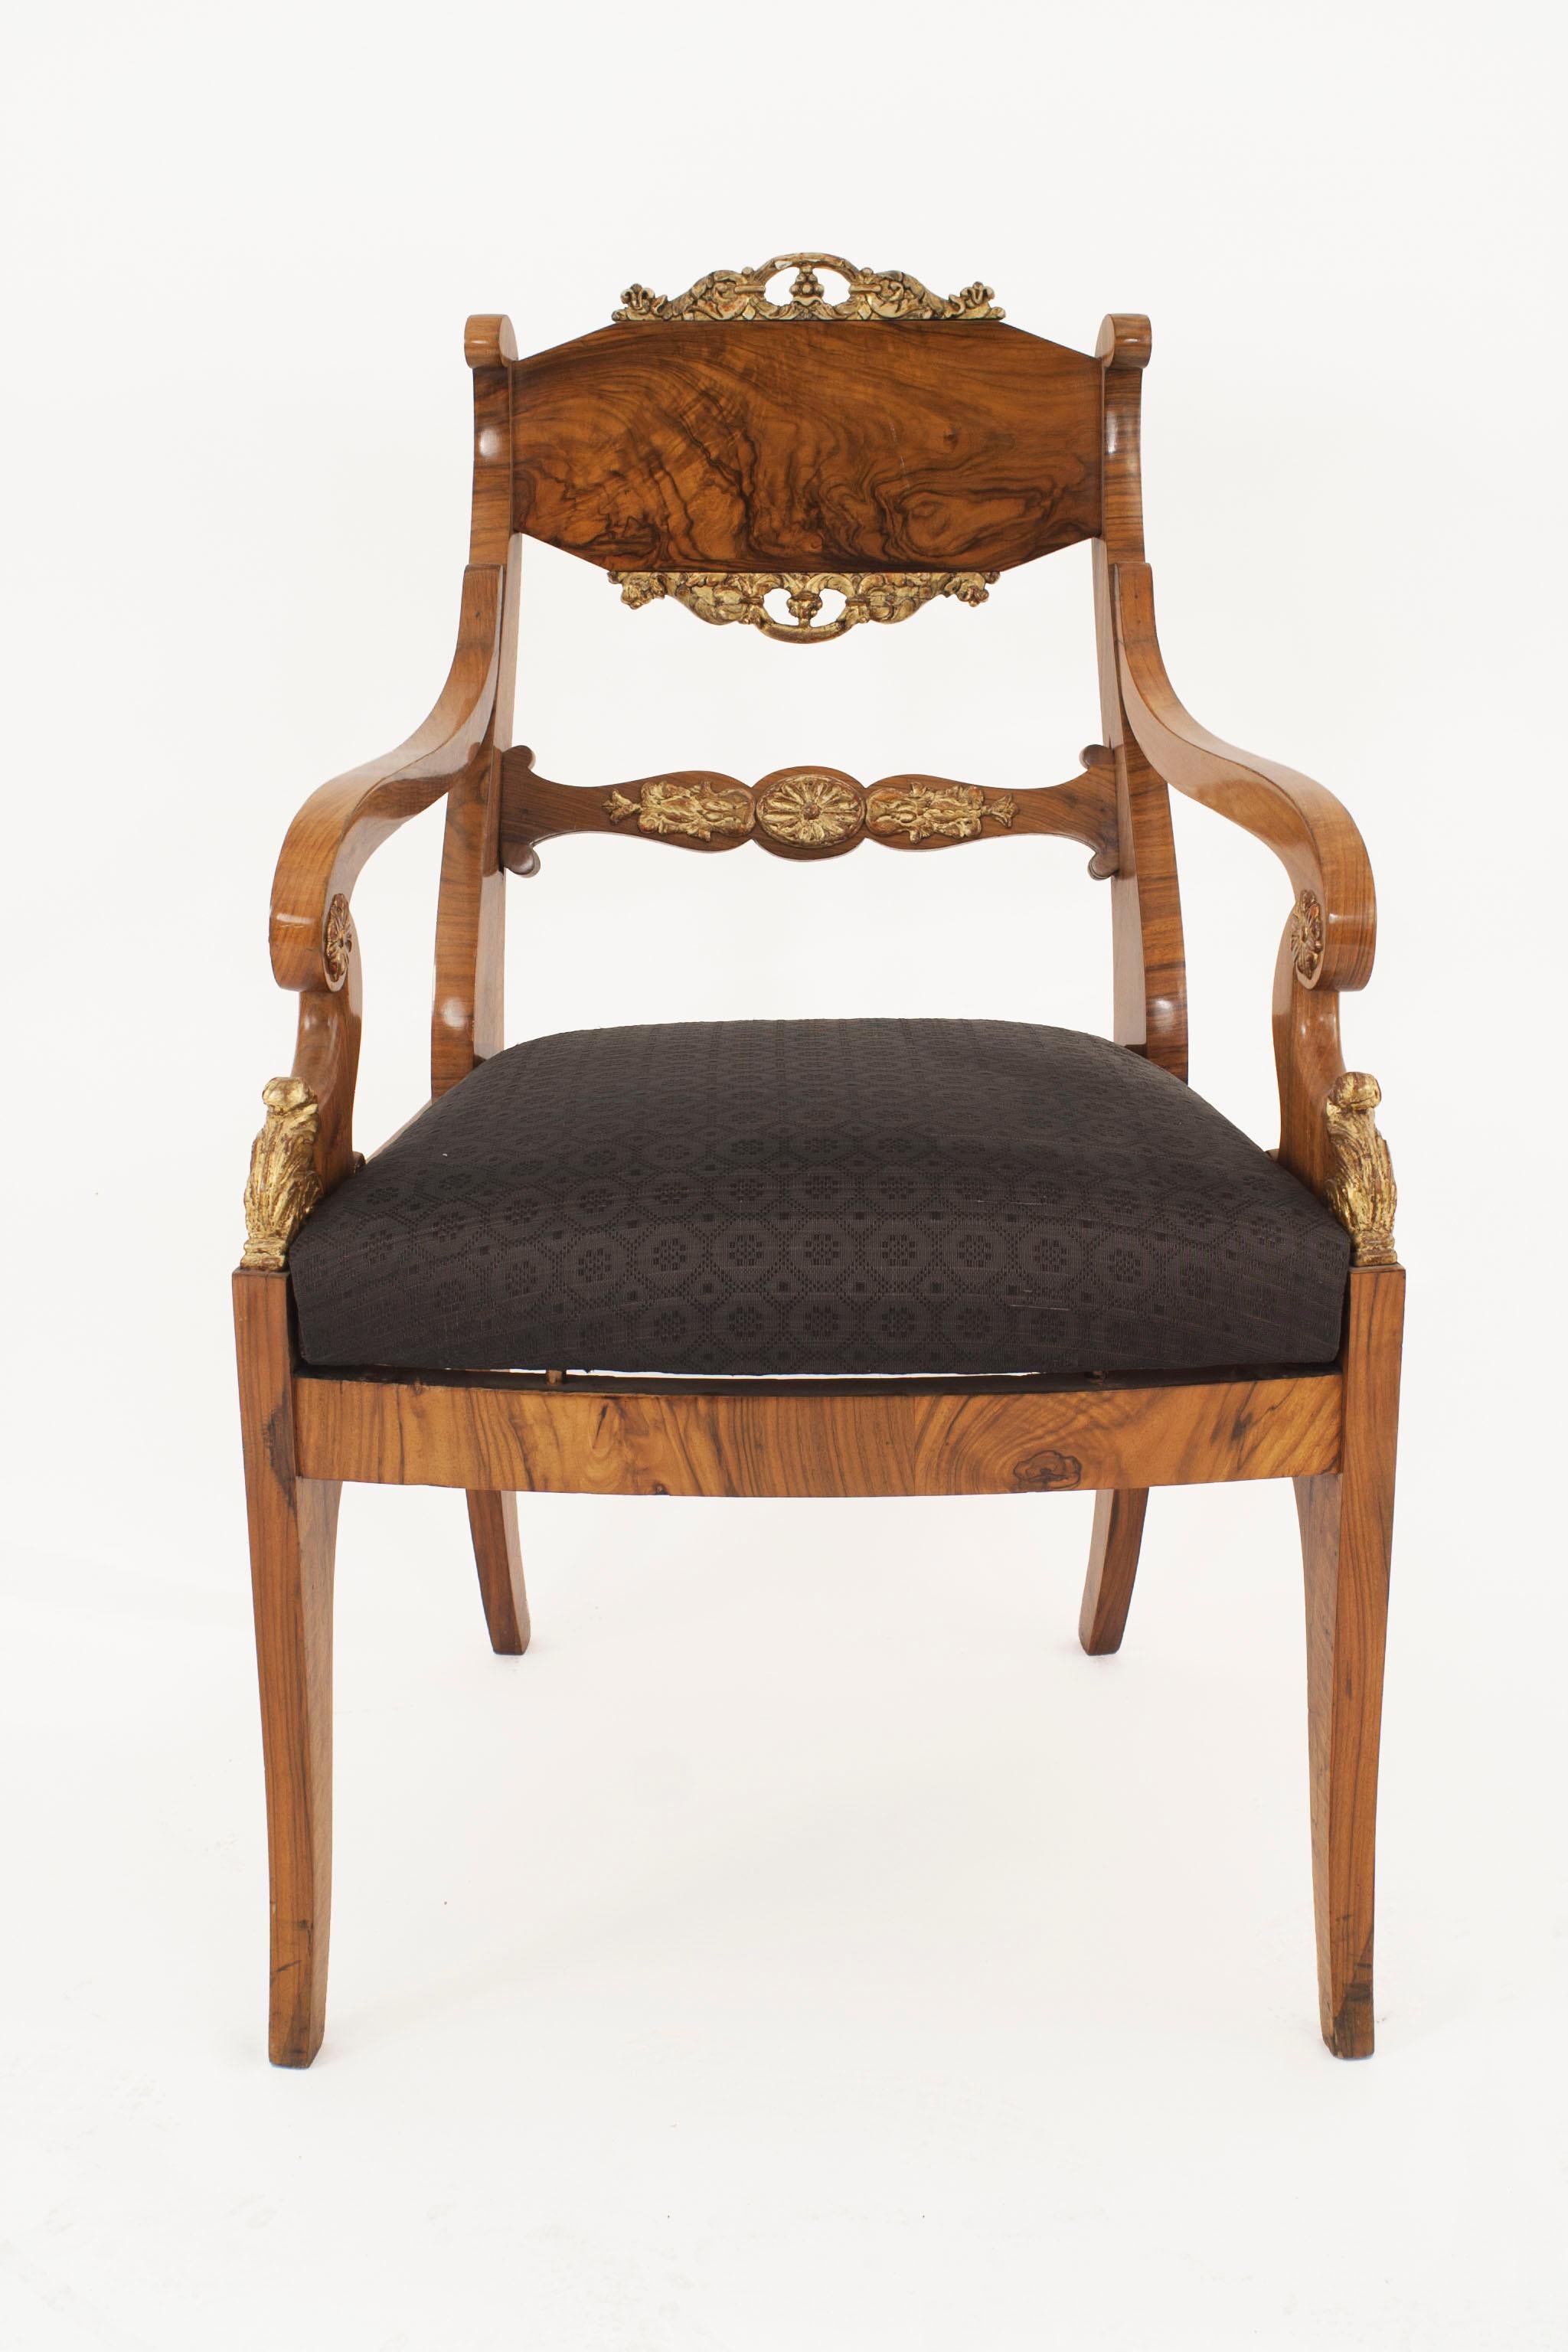 Pair of Russian Neo-classic walnut armchairs with parcel gilt trim and scroll design arms and carving with a slip seat (circa 1830)
